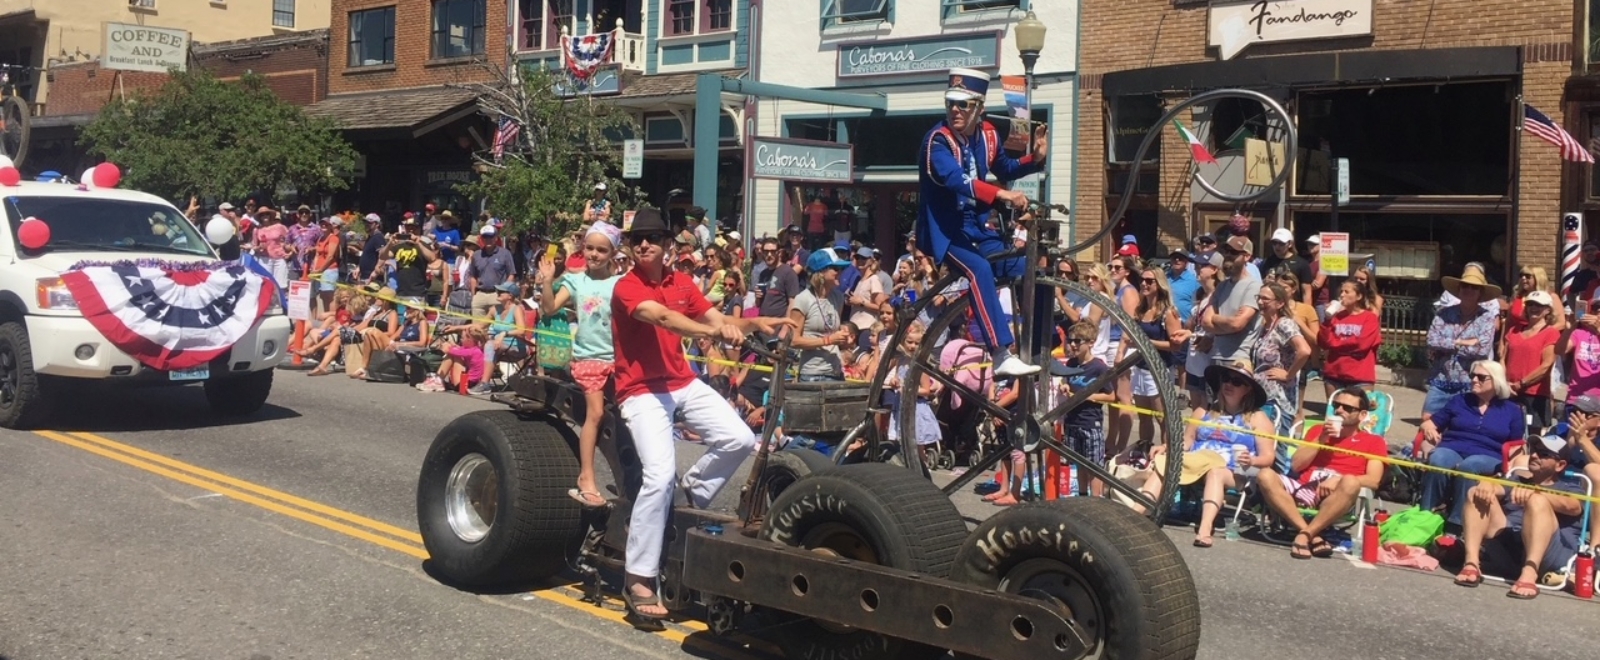 4th of July - Truckee Style!